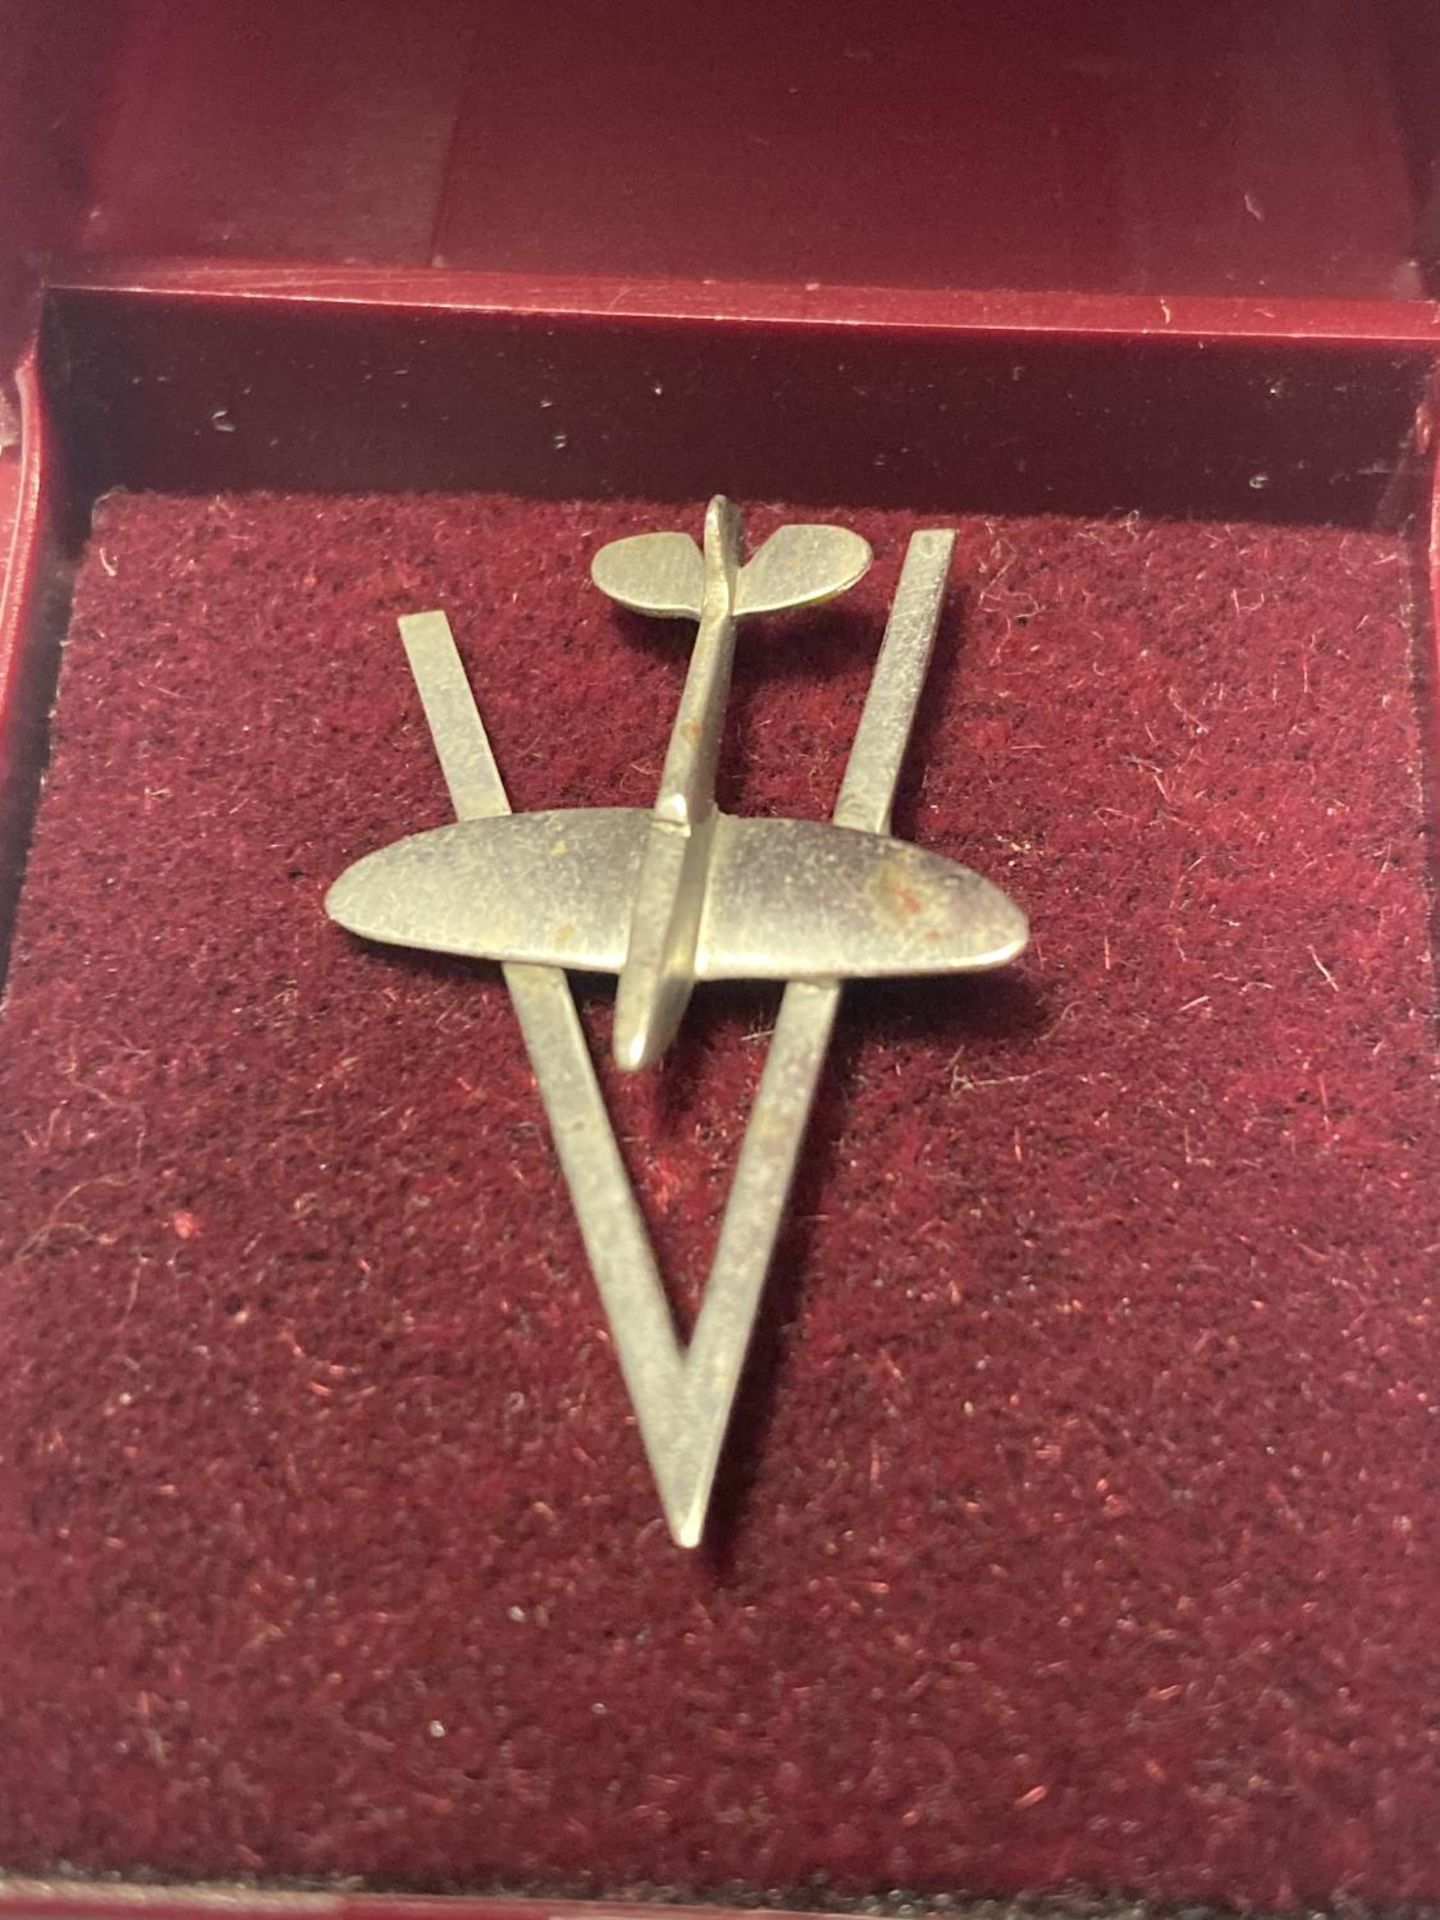 A BOXED SPITFIRE VICTORY V BROOCH - Image 2 of 2